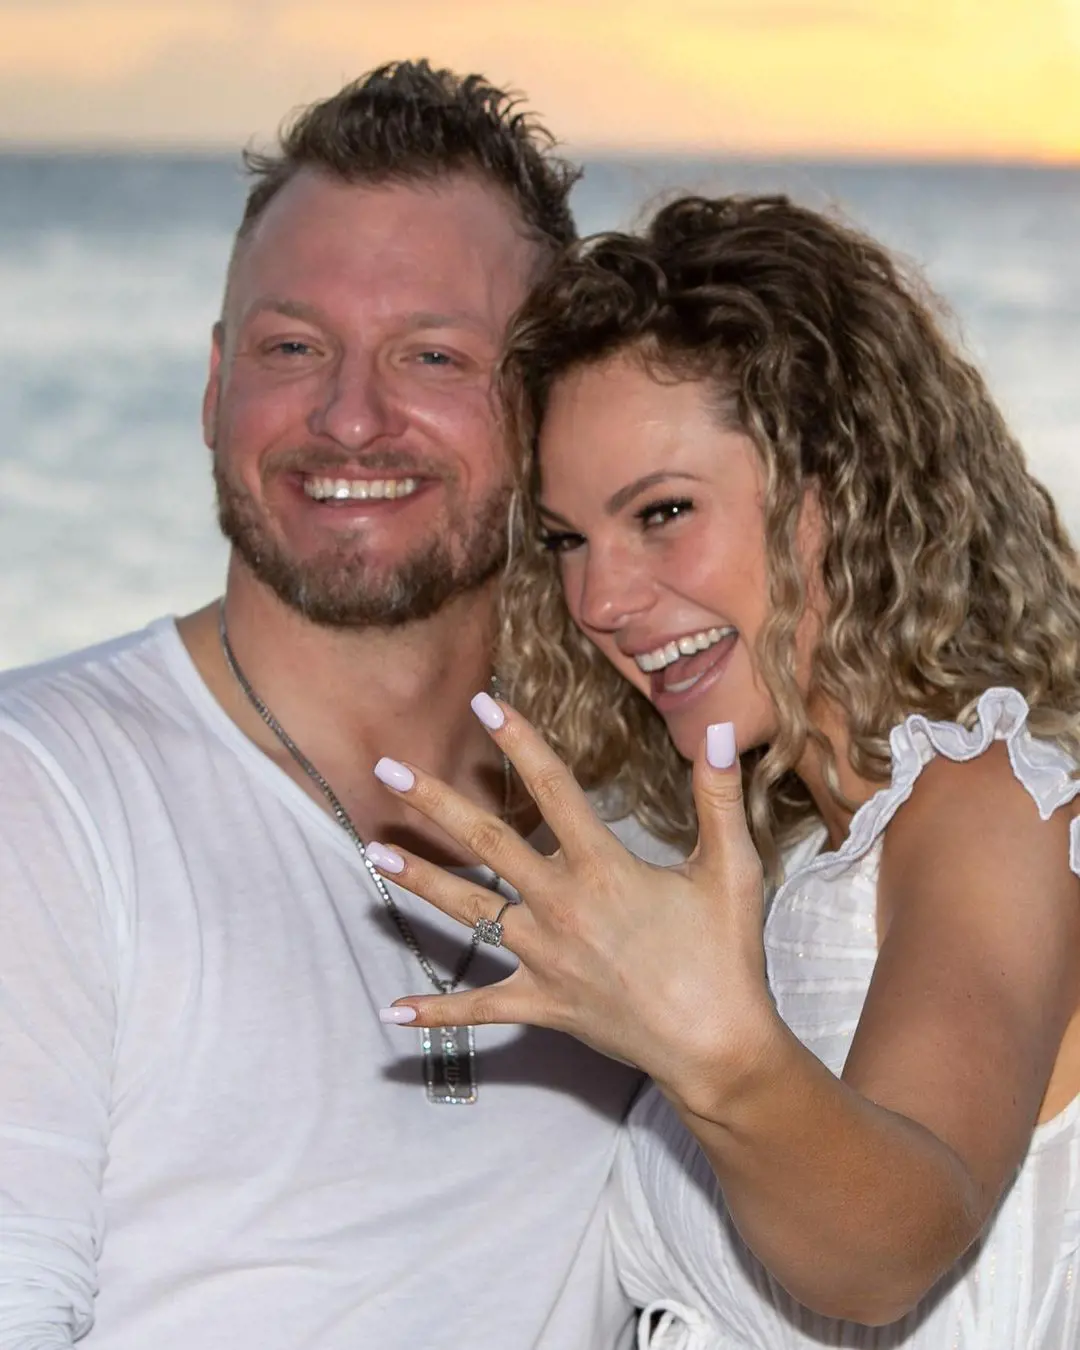 Donaldson got engaged to his girlfriend, Miller in February 2022